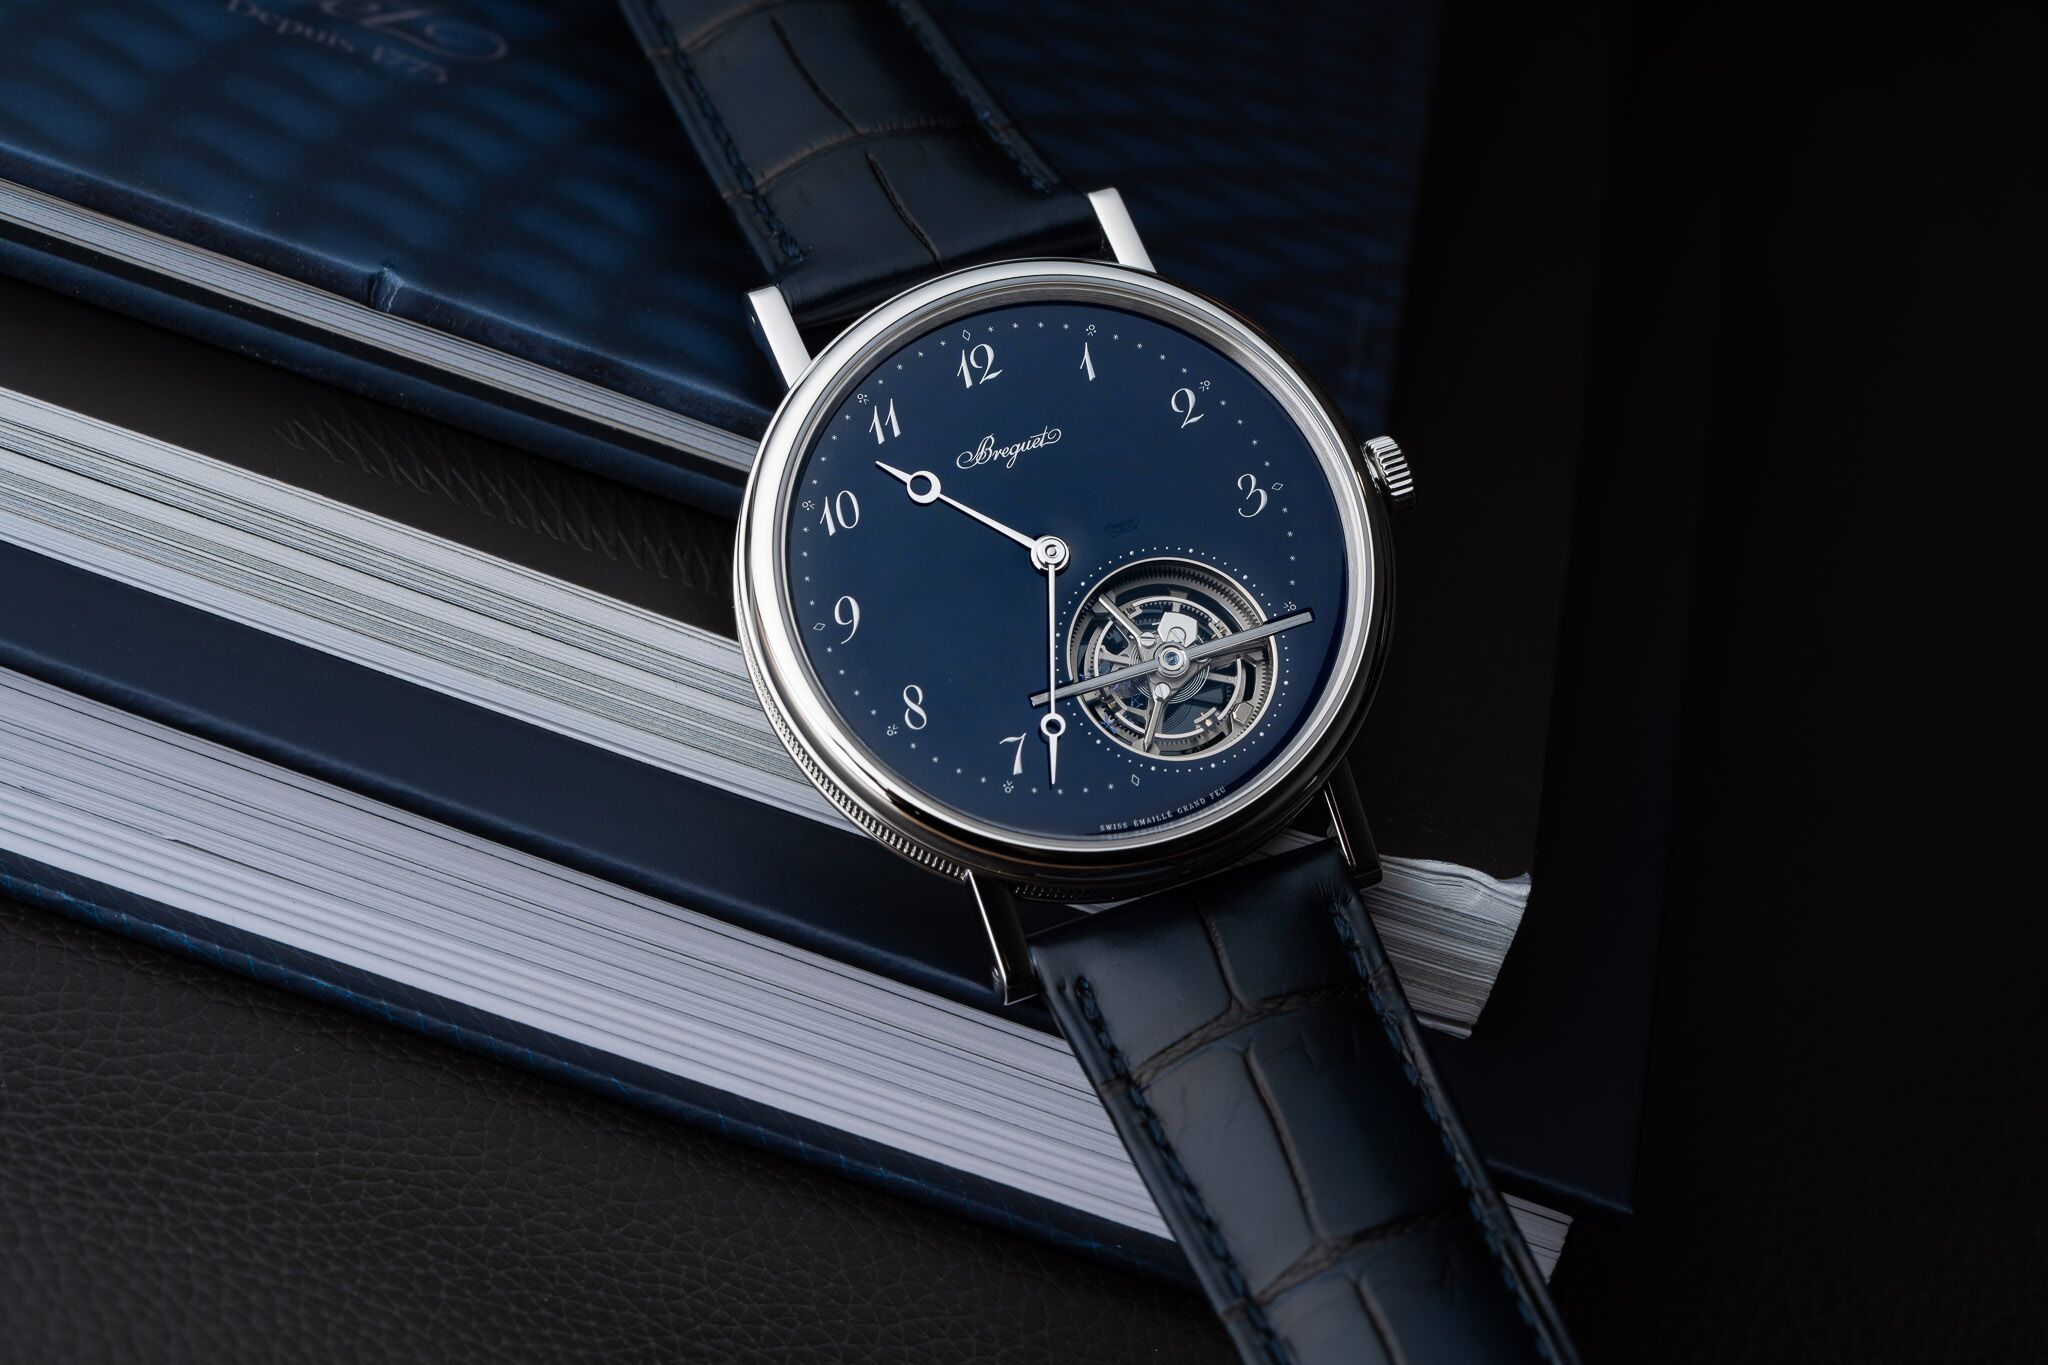 Breguet Is Betting On Blue With New Models